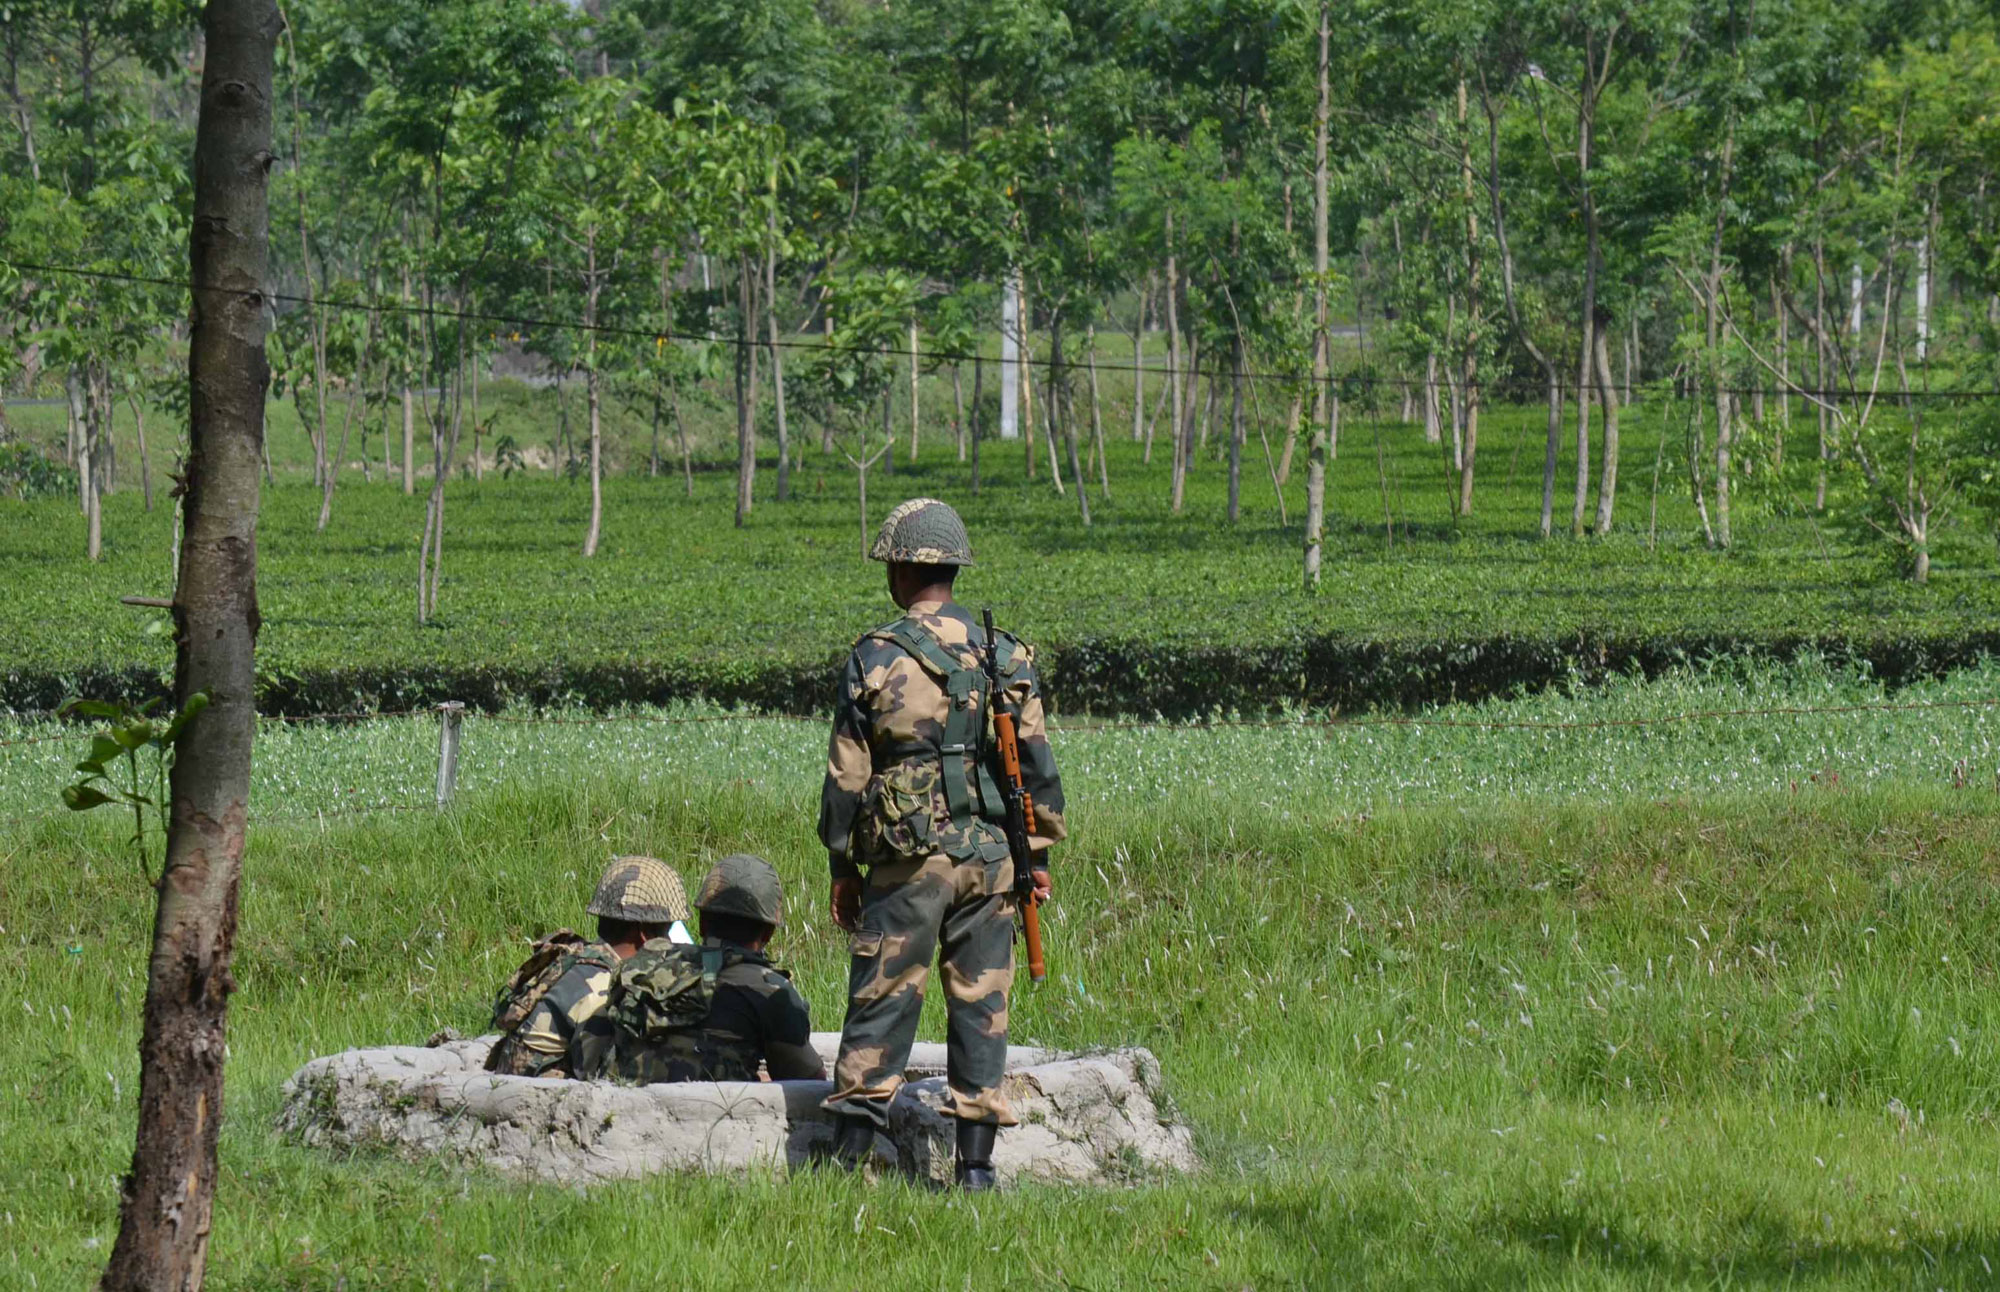 On Thursday, BSF head constable Vijay Bhan Singh, 51, was killed and another constable was injured in alleged firing by BGB personnel at the Indian forces who had gone to secure the release of an Indian fisherman who had strayed into Bangladesh waters. 